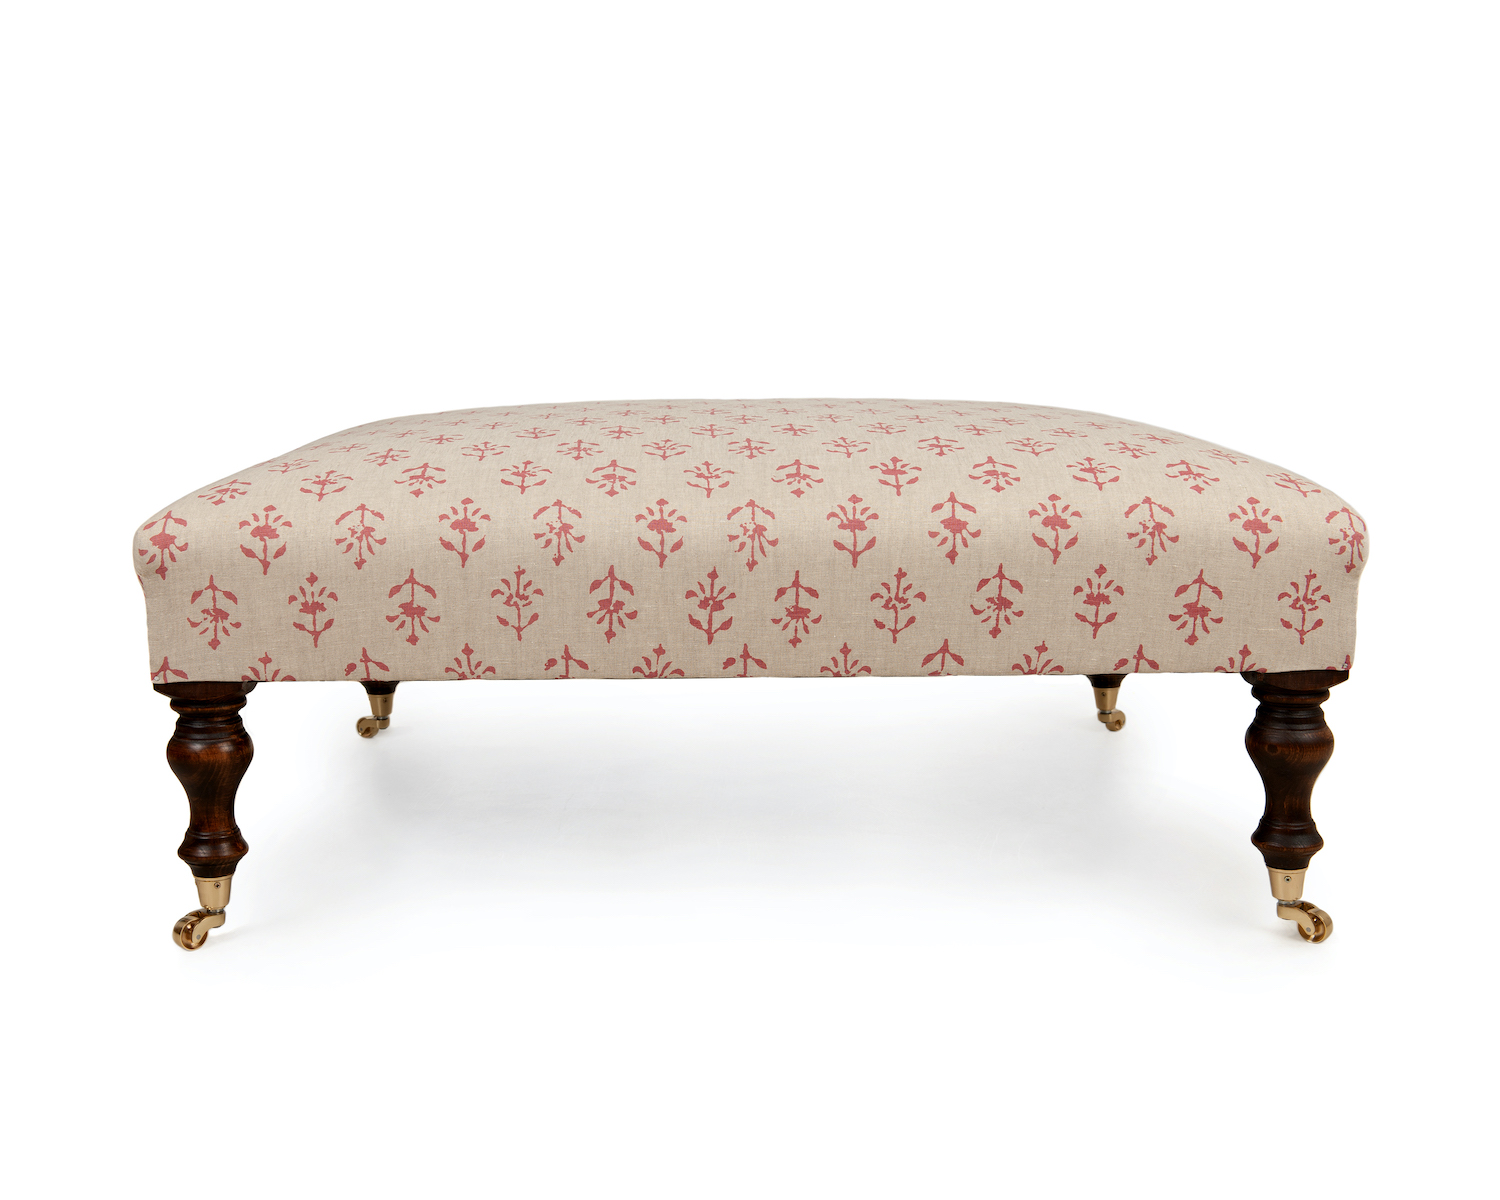 Blockprinted Wrapover Footstool with Turned Legs and Castors